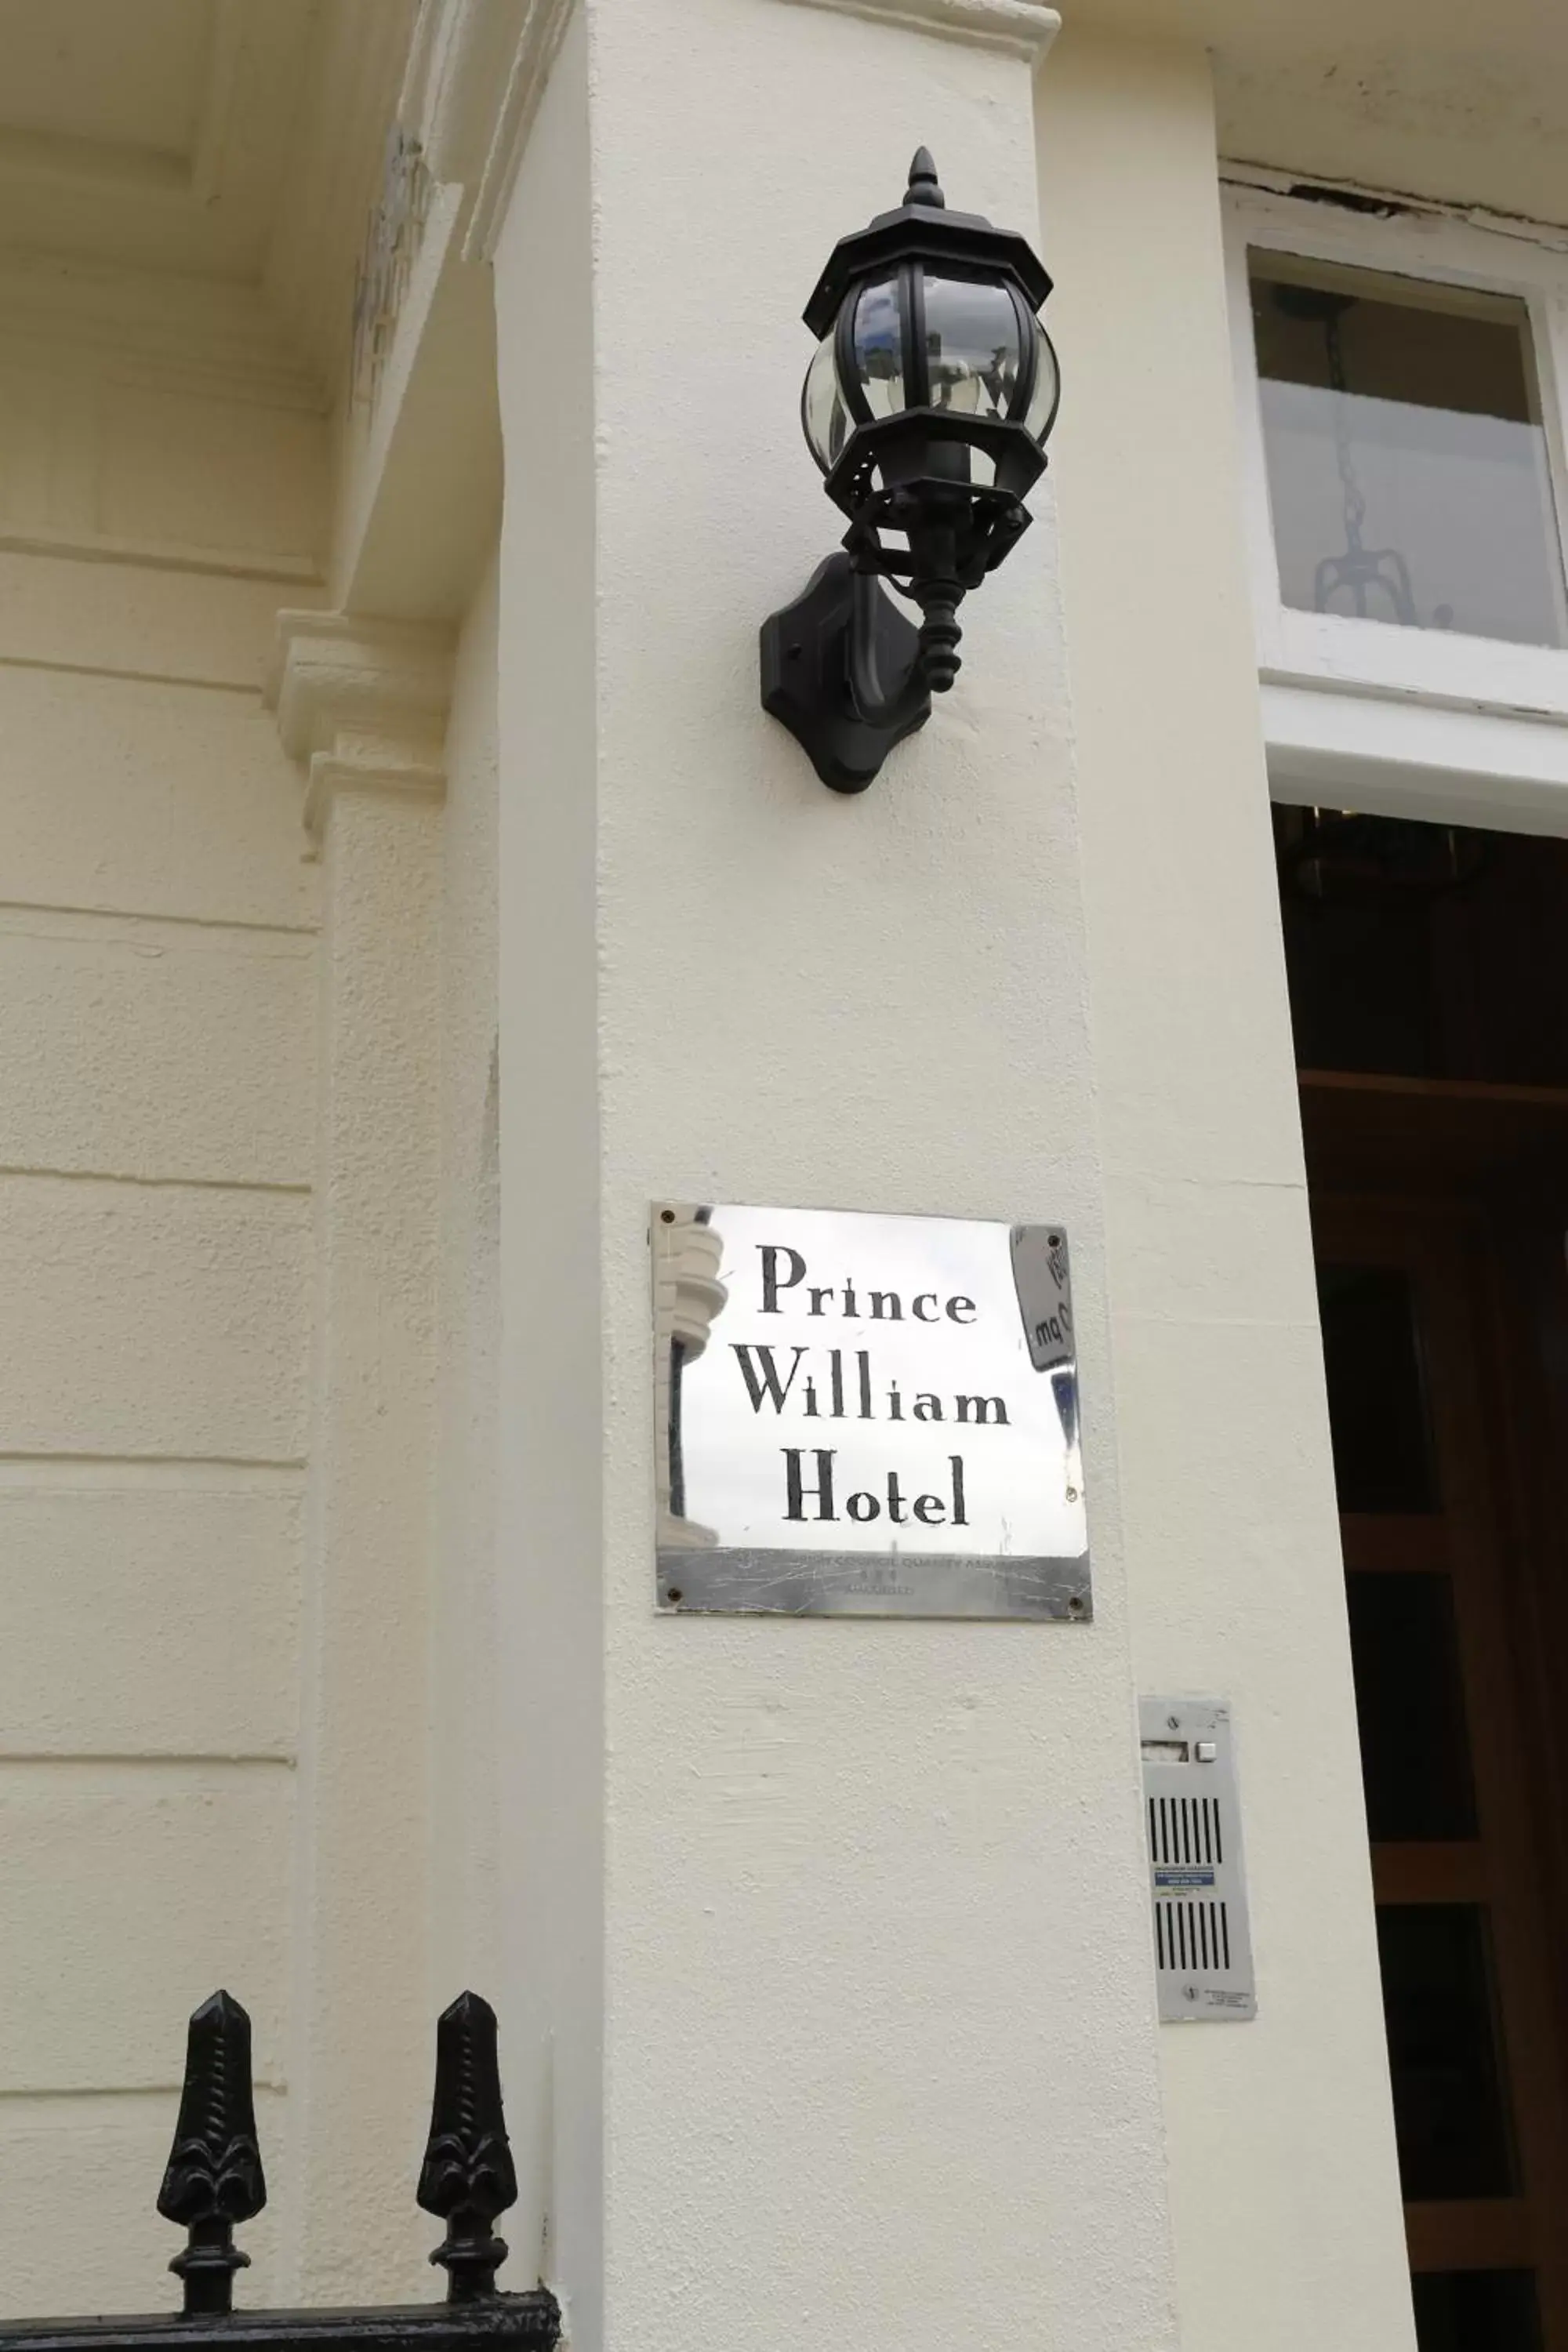 Property logo or sign in Prince William Hotel